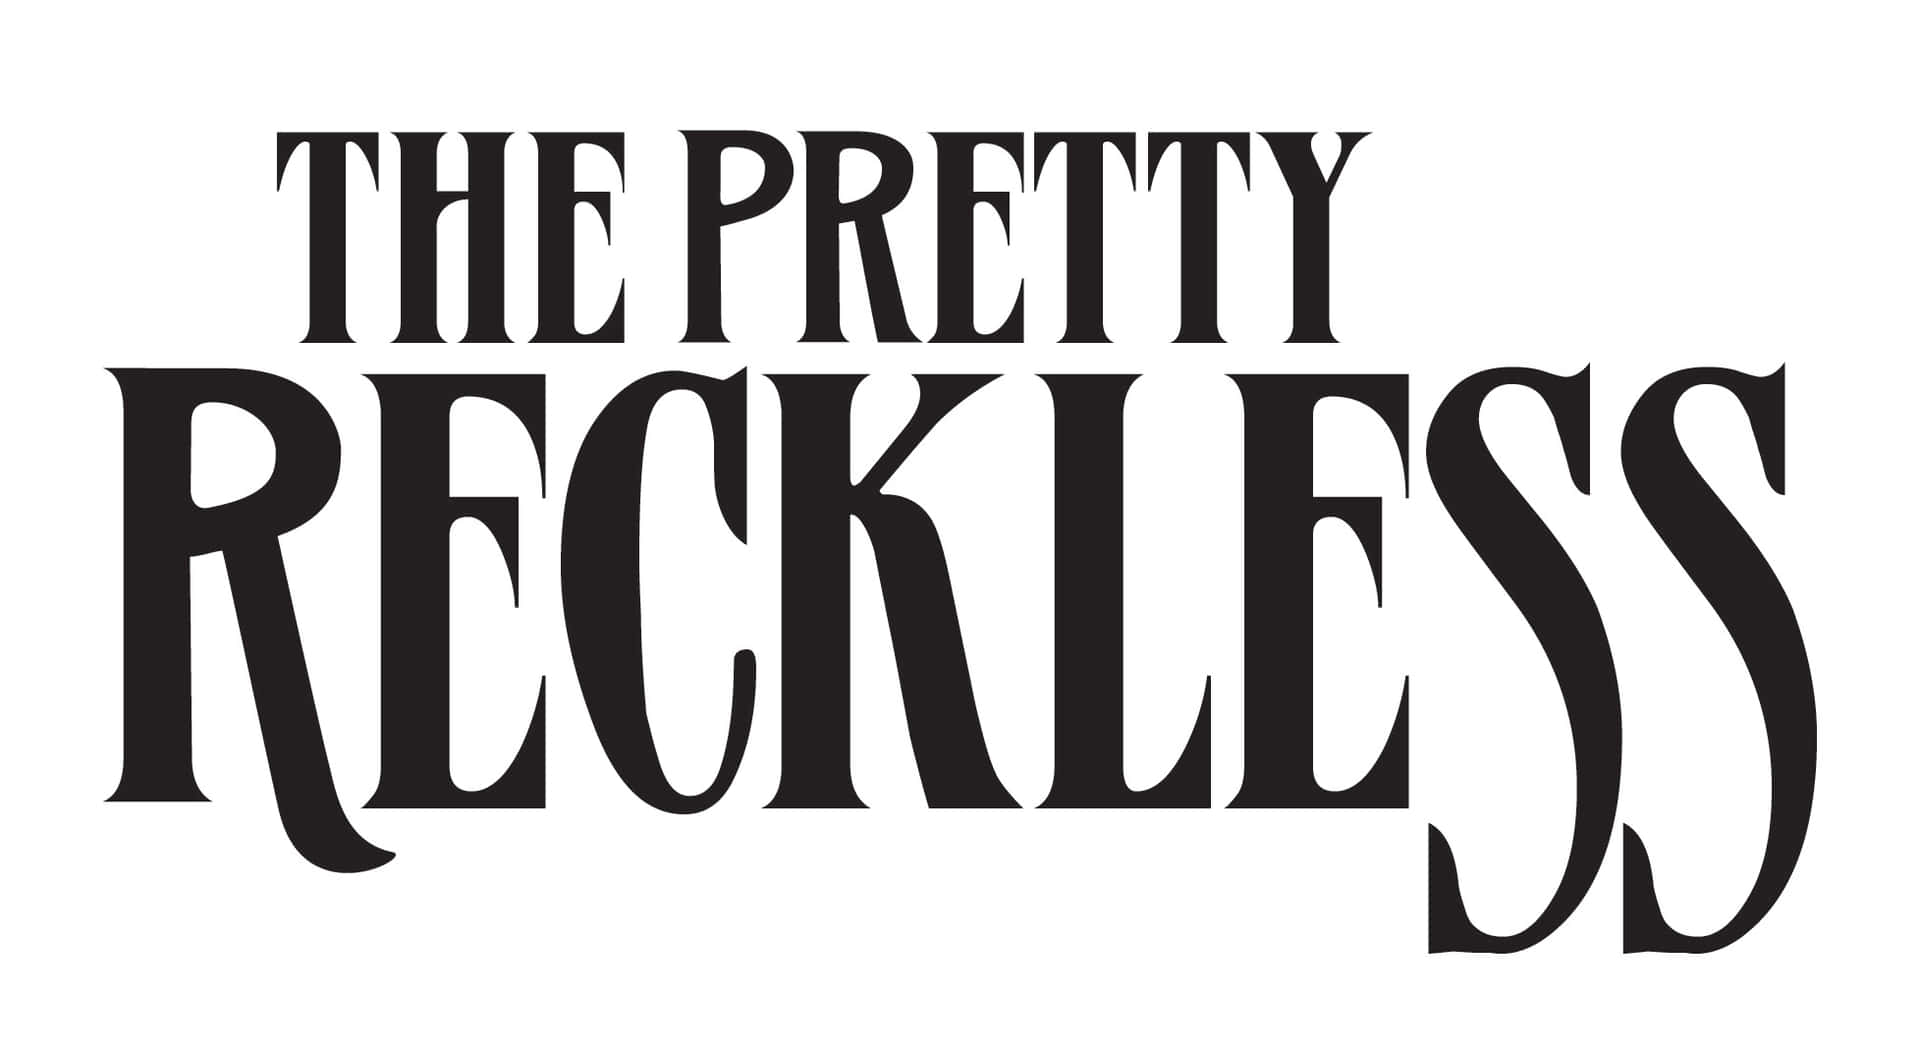 The Pretty Reckless Band Name Wallpaper